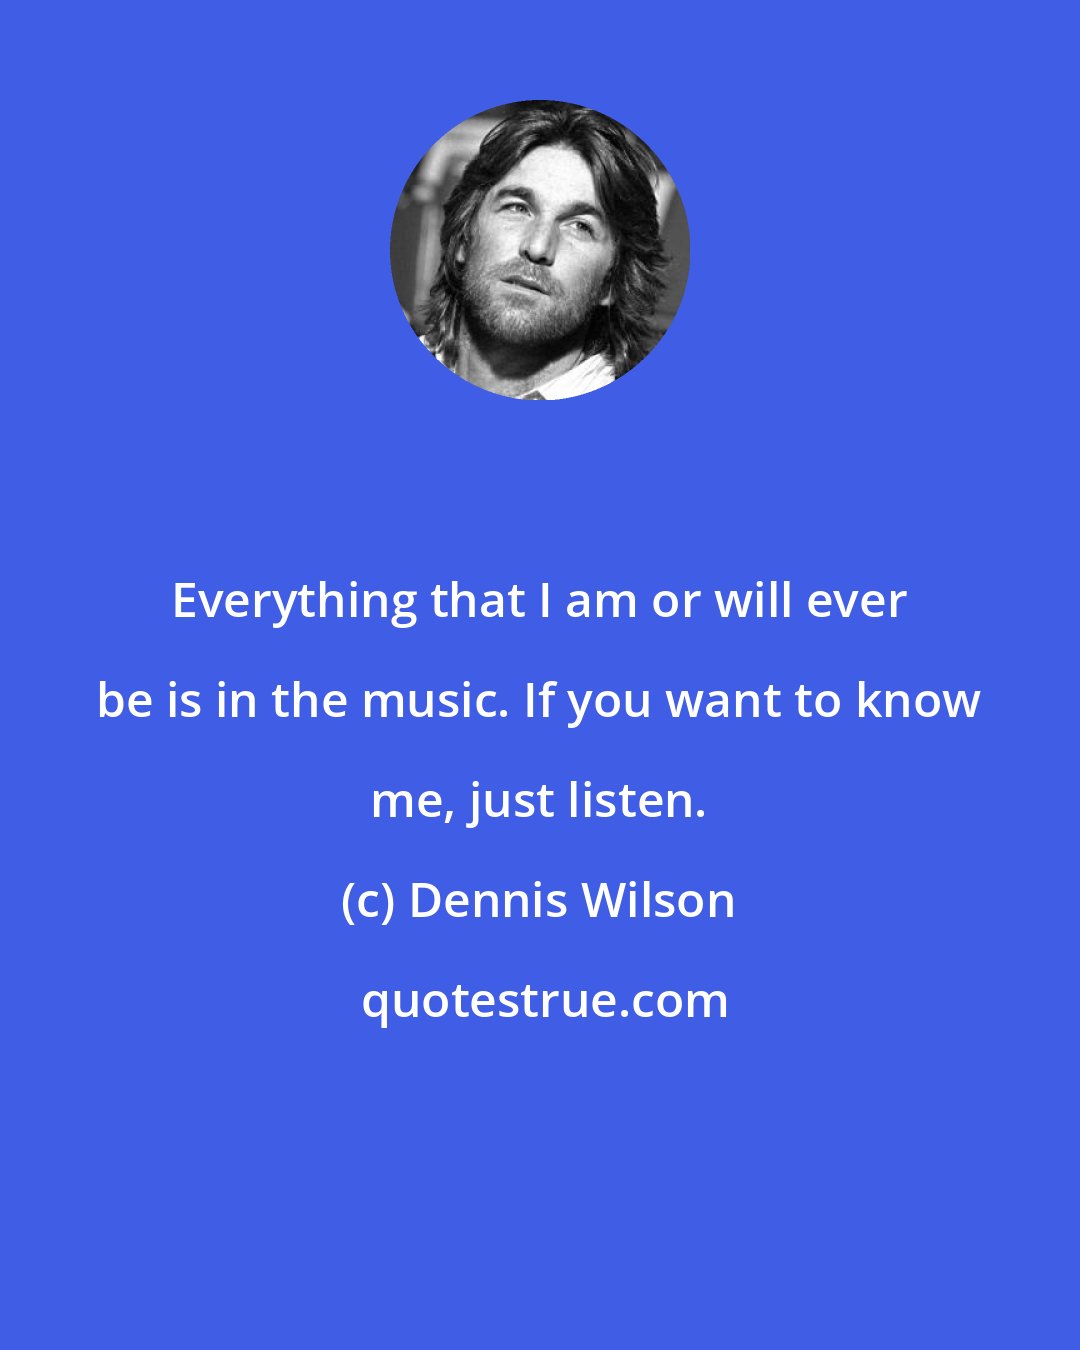 Dennis Wilson: Everything that I am or will ever be is in the music. If you want to know me, just listen.